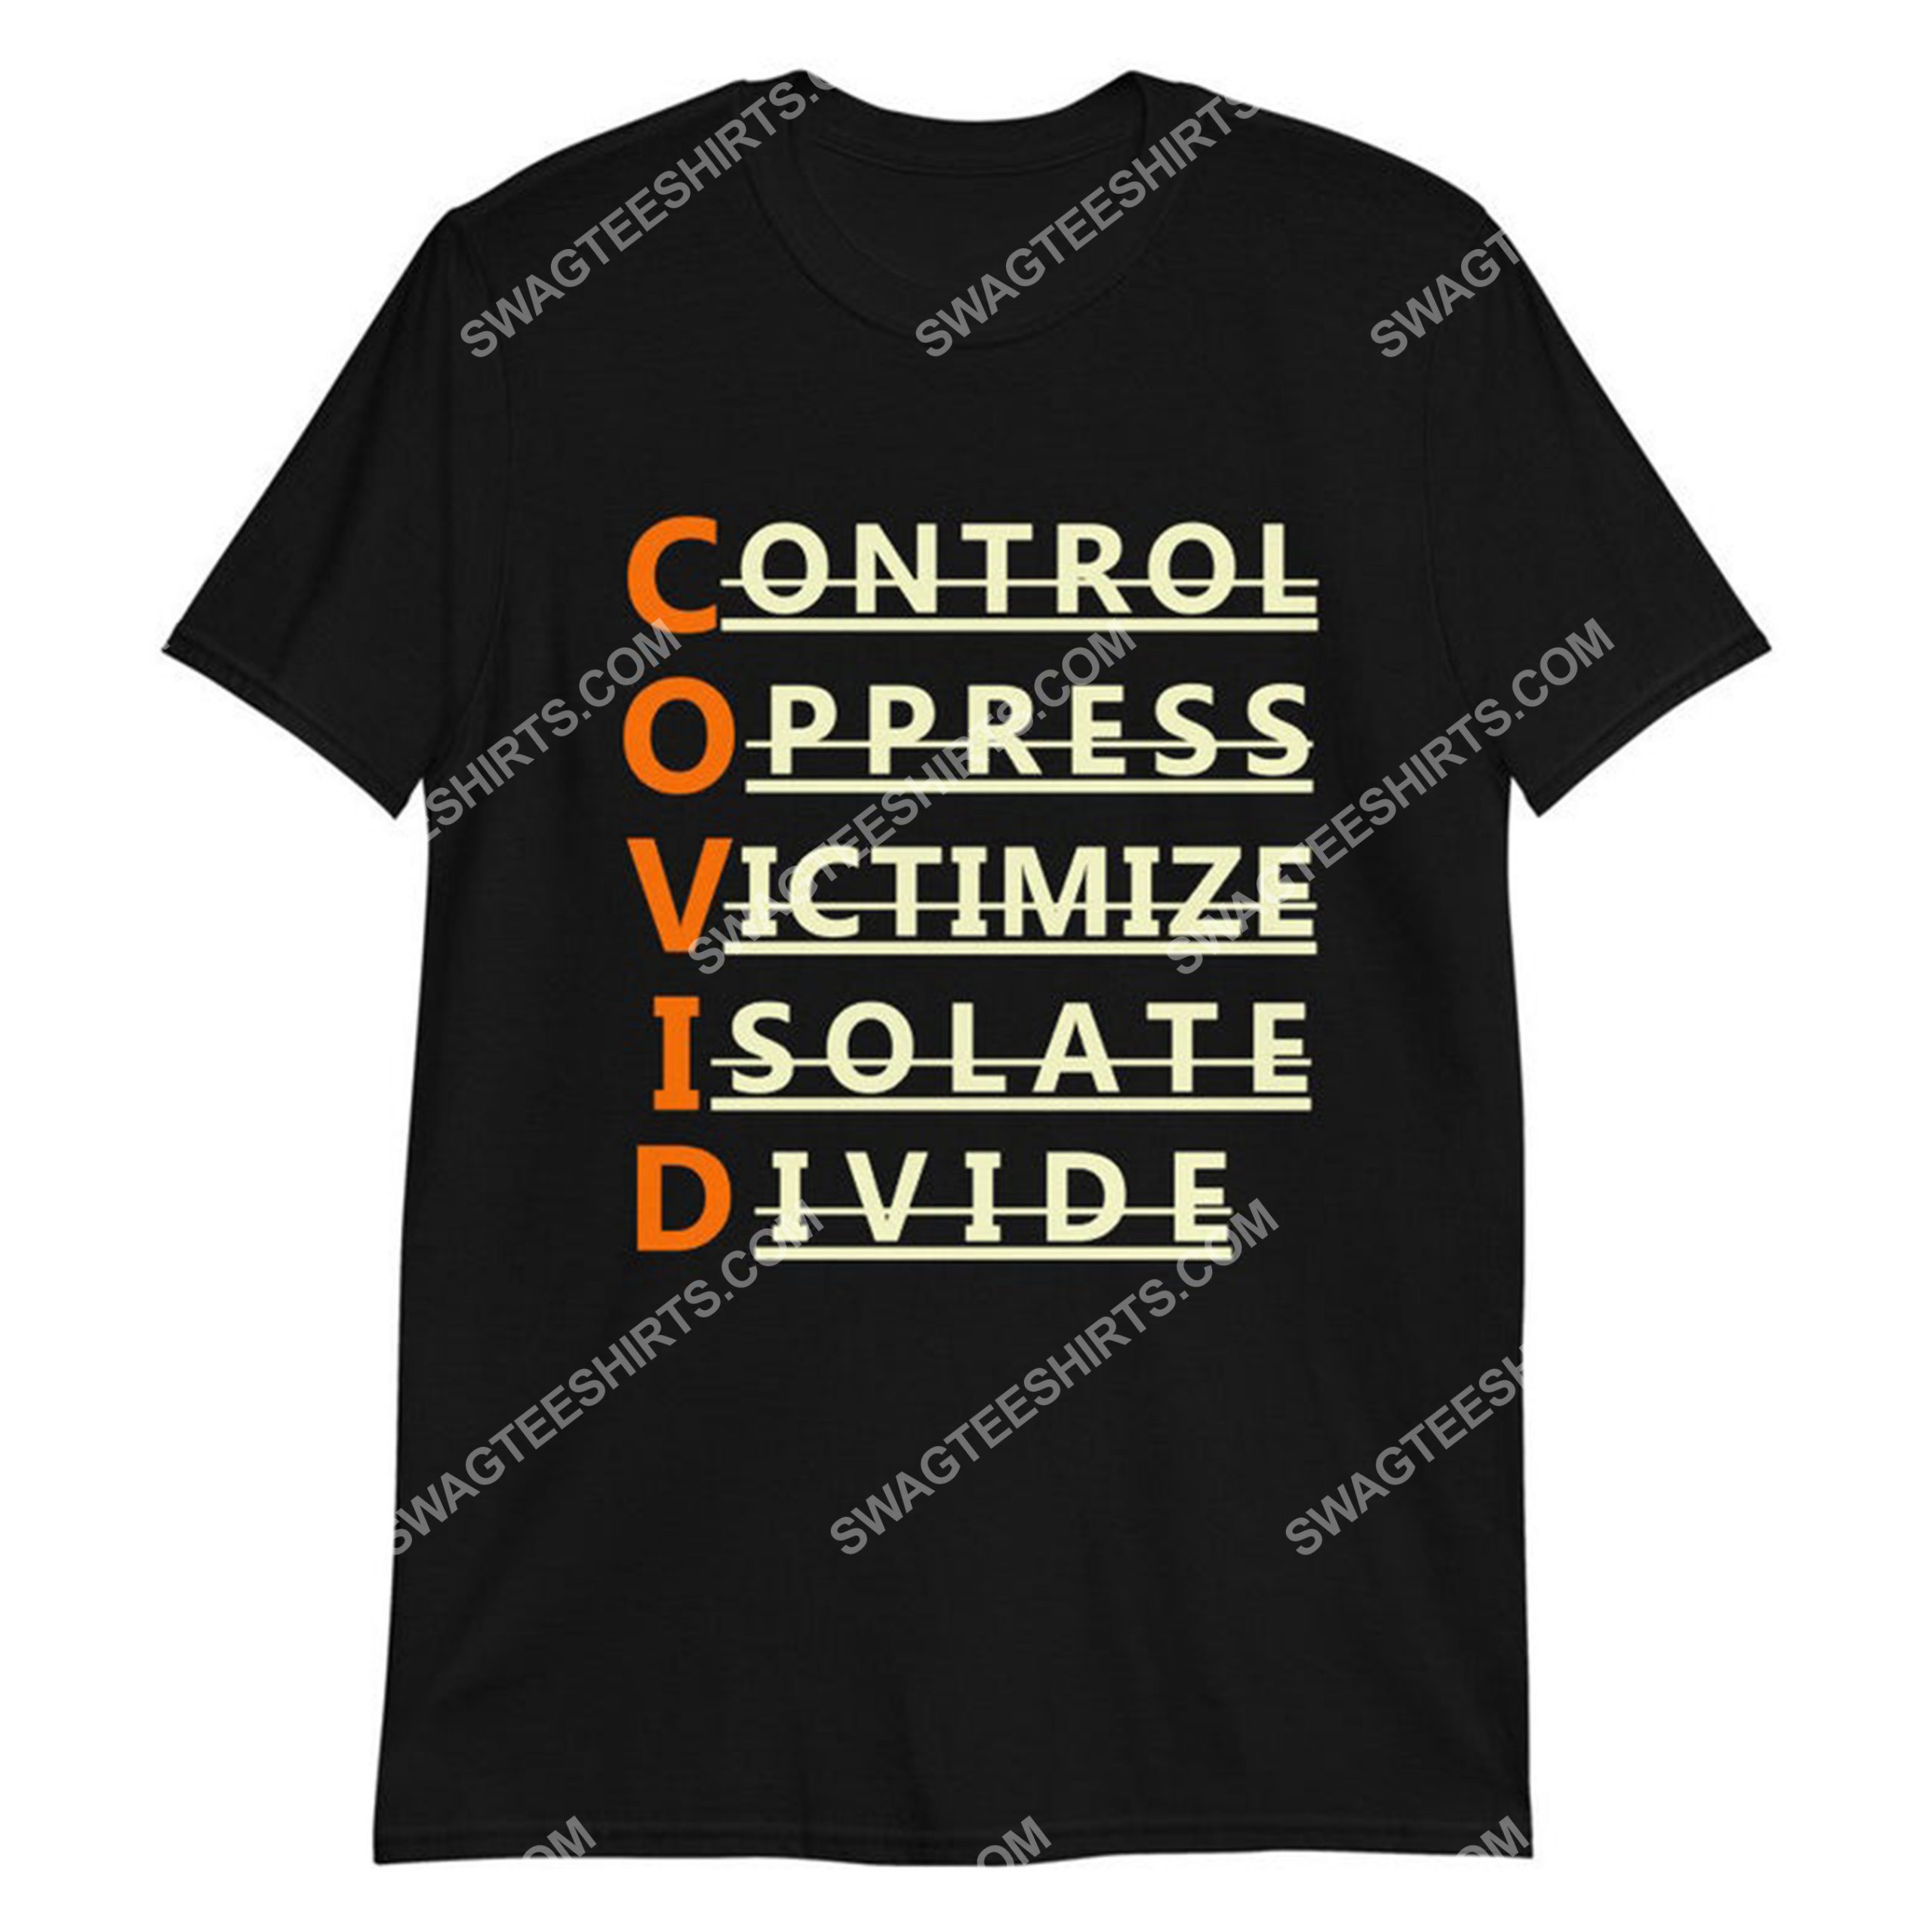 control oppress victimize isolate divide shirt 1(1)